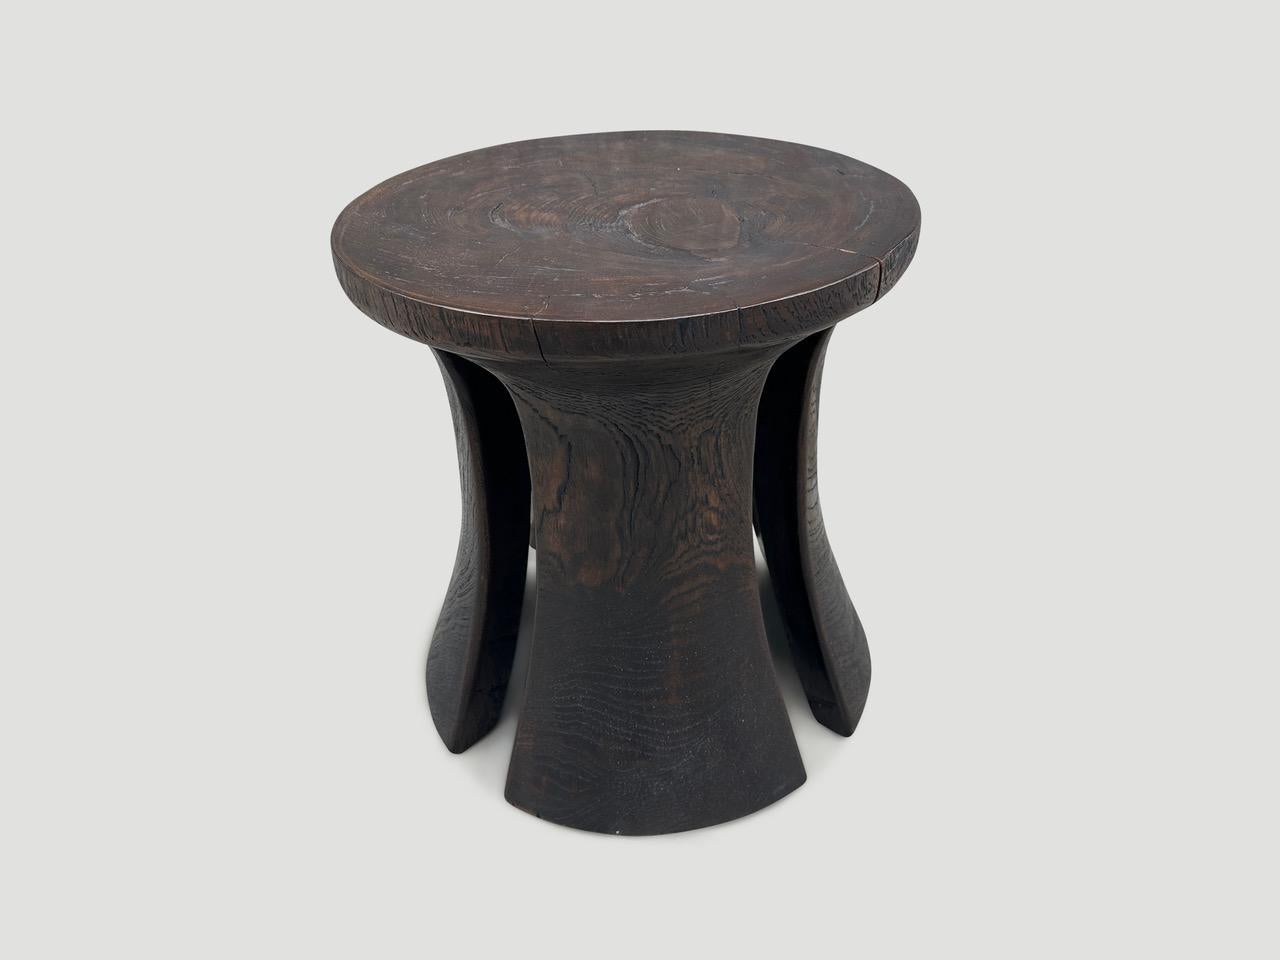 Andrianna Shamaris Sculptural Teak Wood Side Table or Stool  In Excellent Condition For Sale In New York, NY